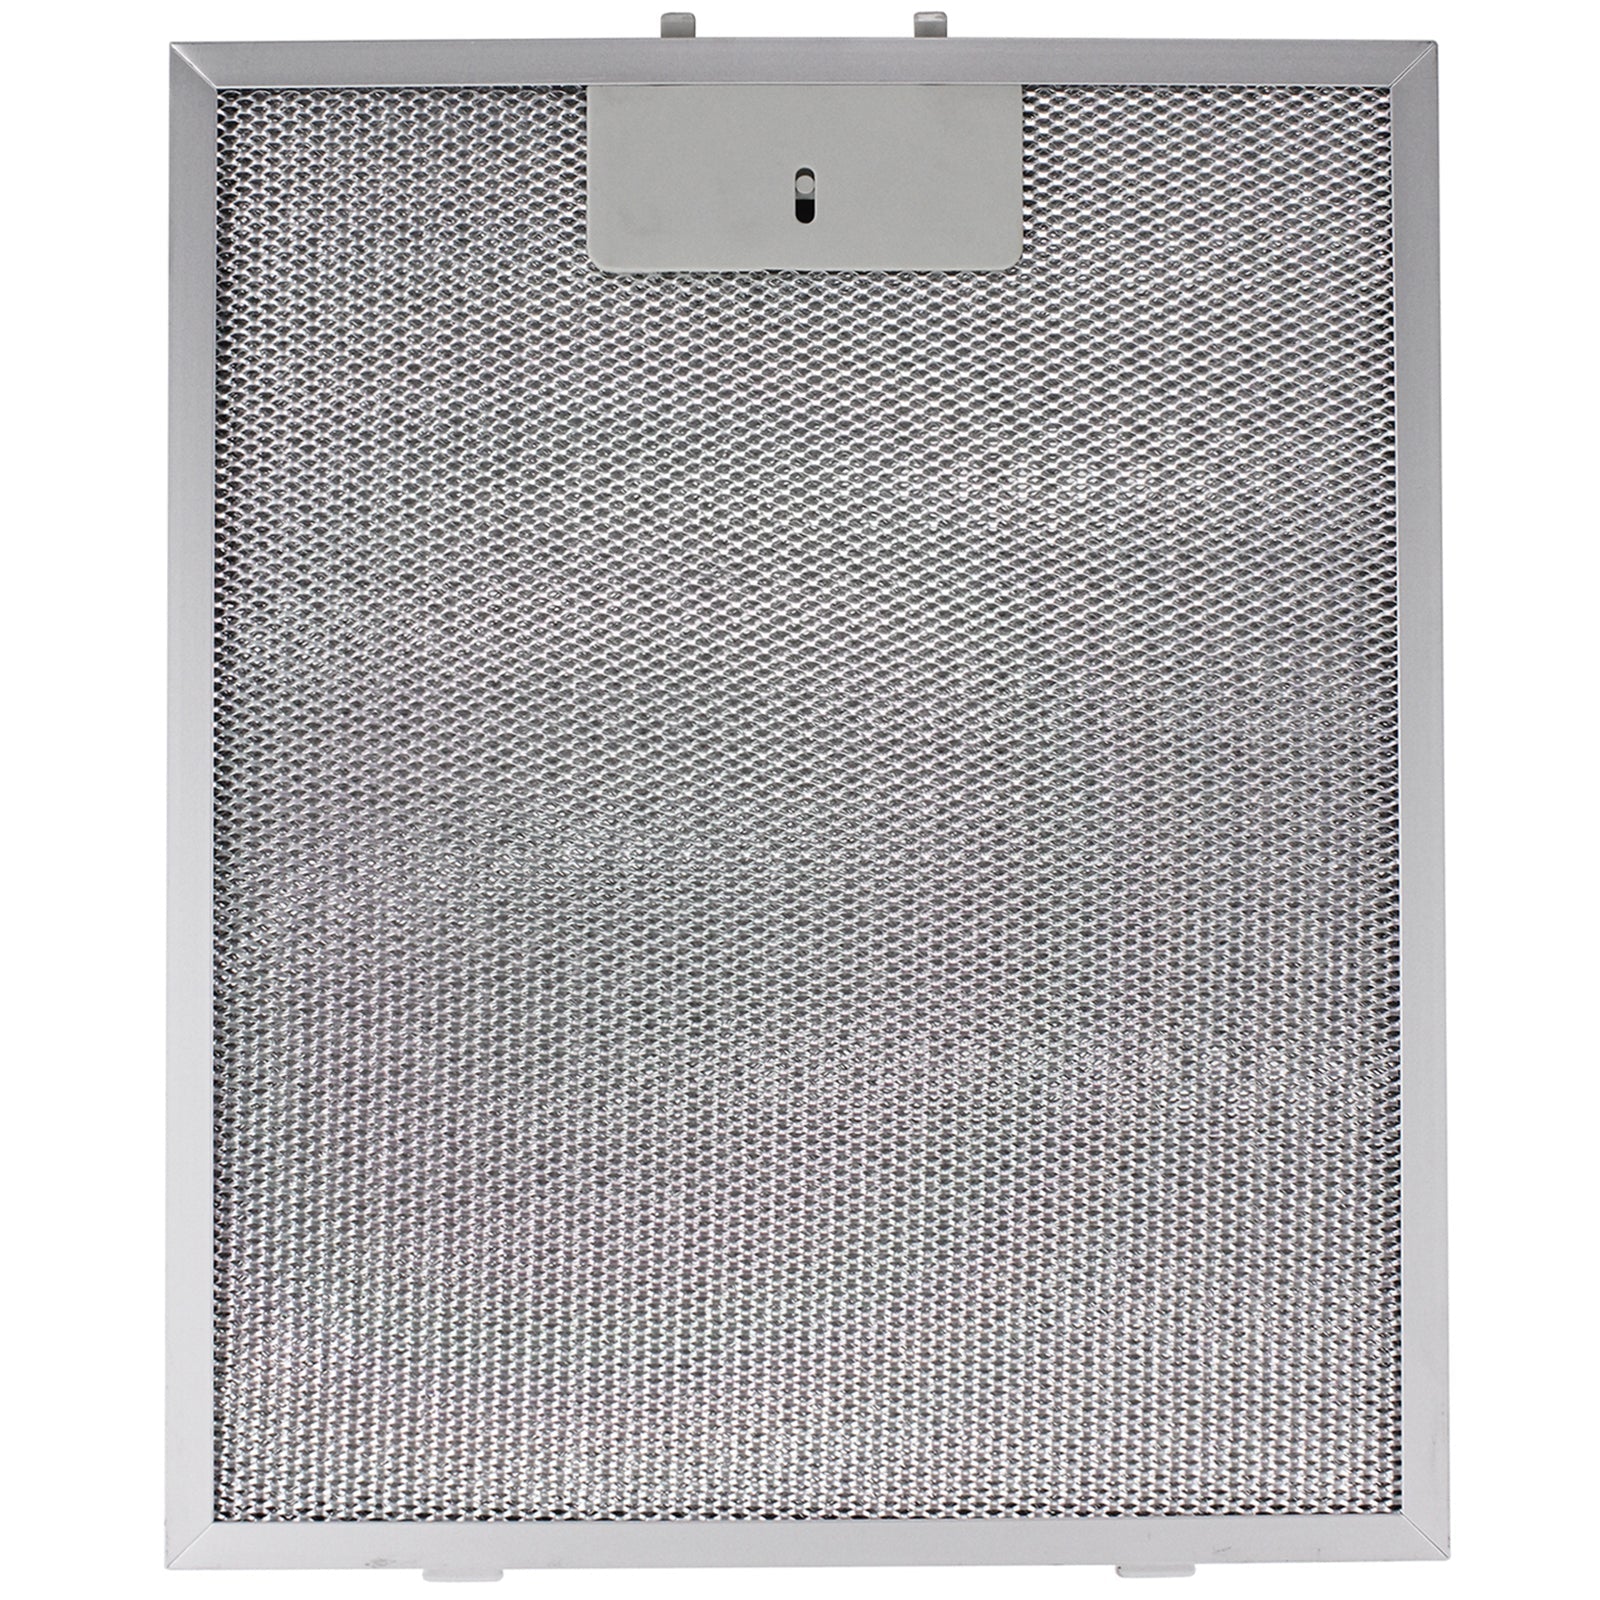 Metal Grease filter For AEG BAUMATIC Cooker Hood Extractor Vent Fan 320 x 260mm